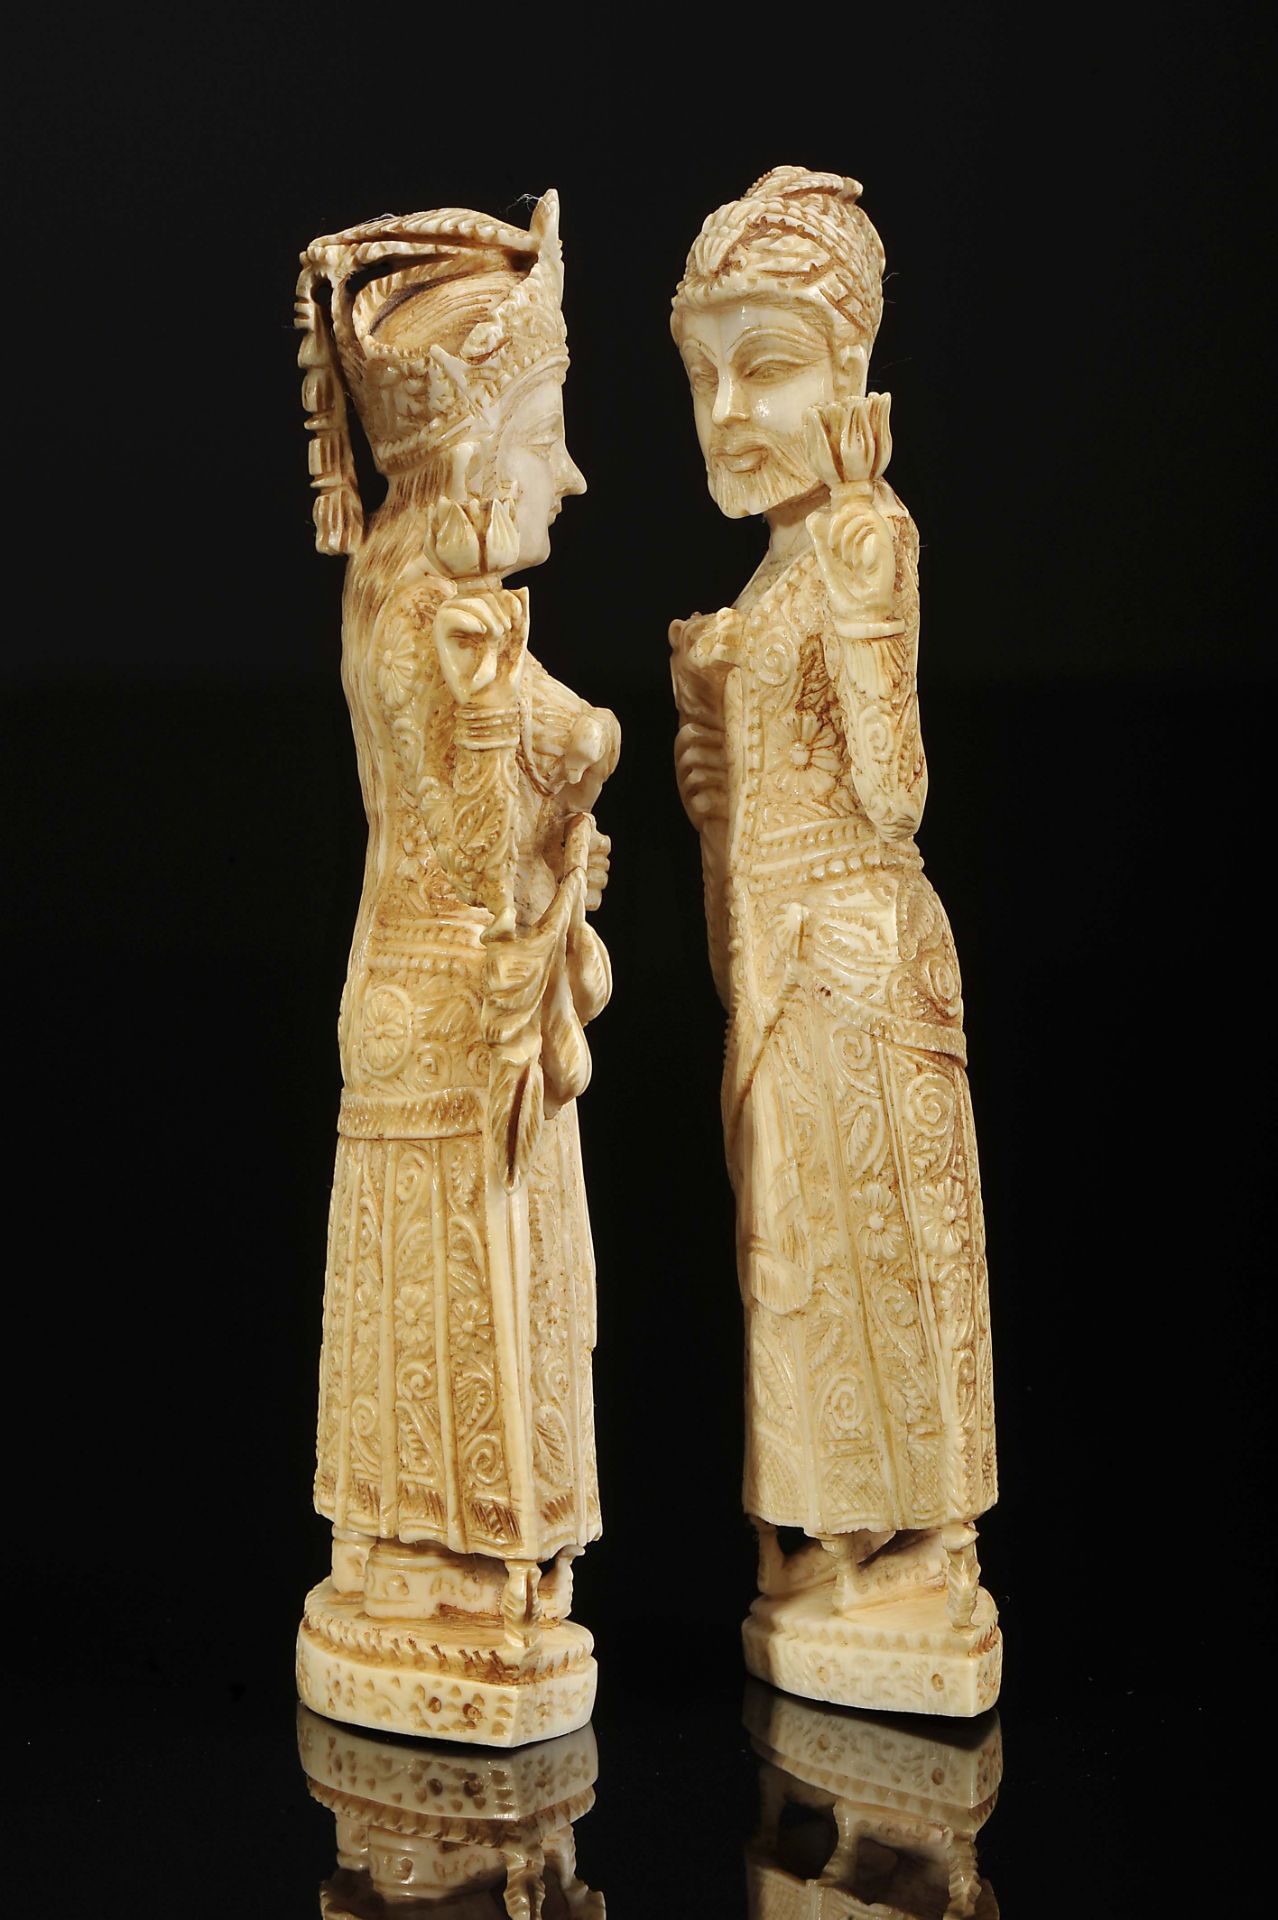 Chess Pieces Mughal Emperor and Empress